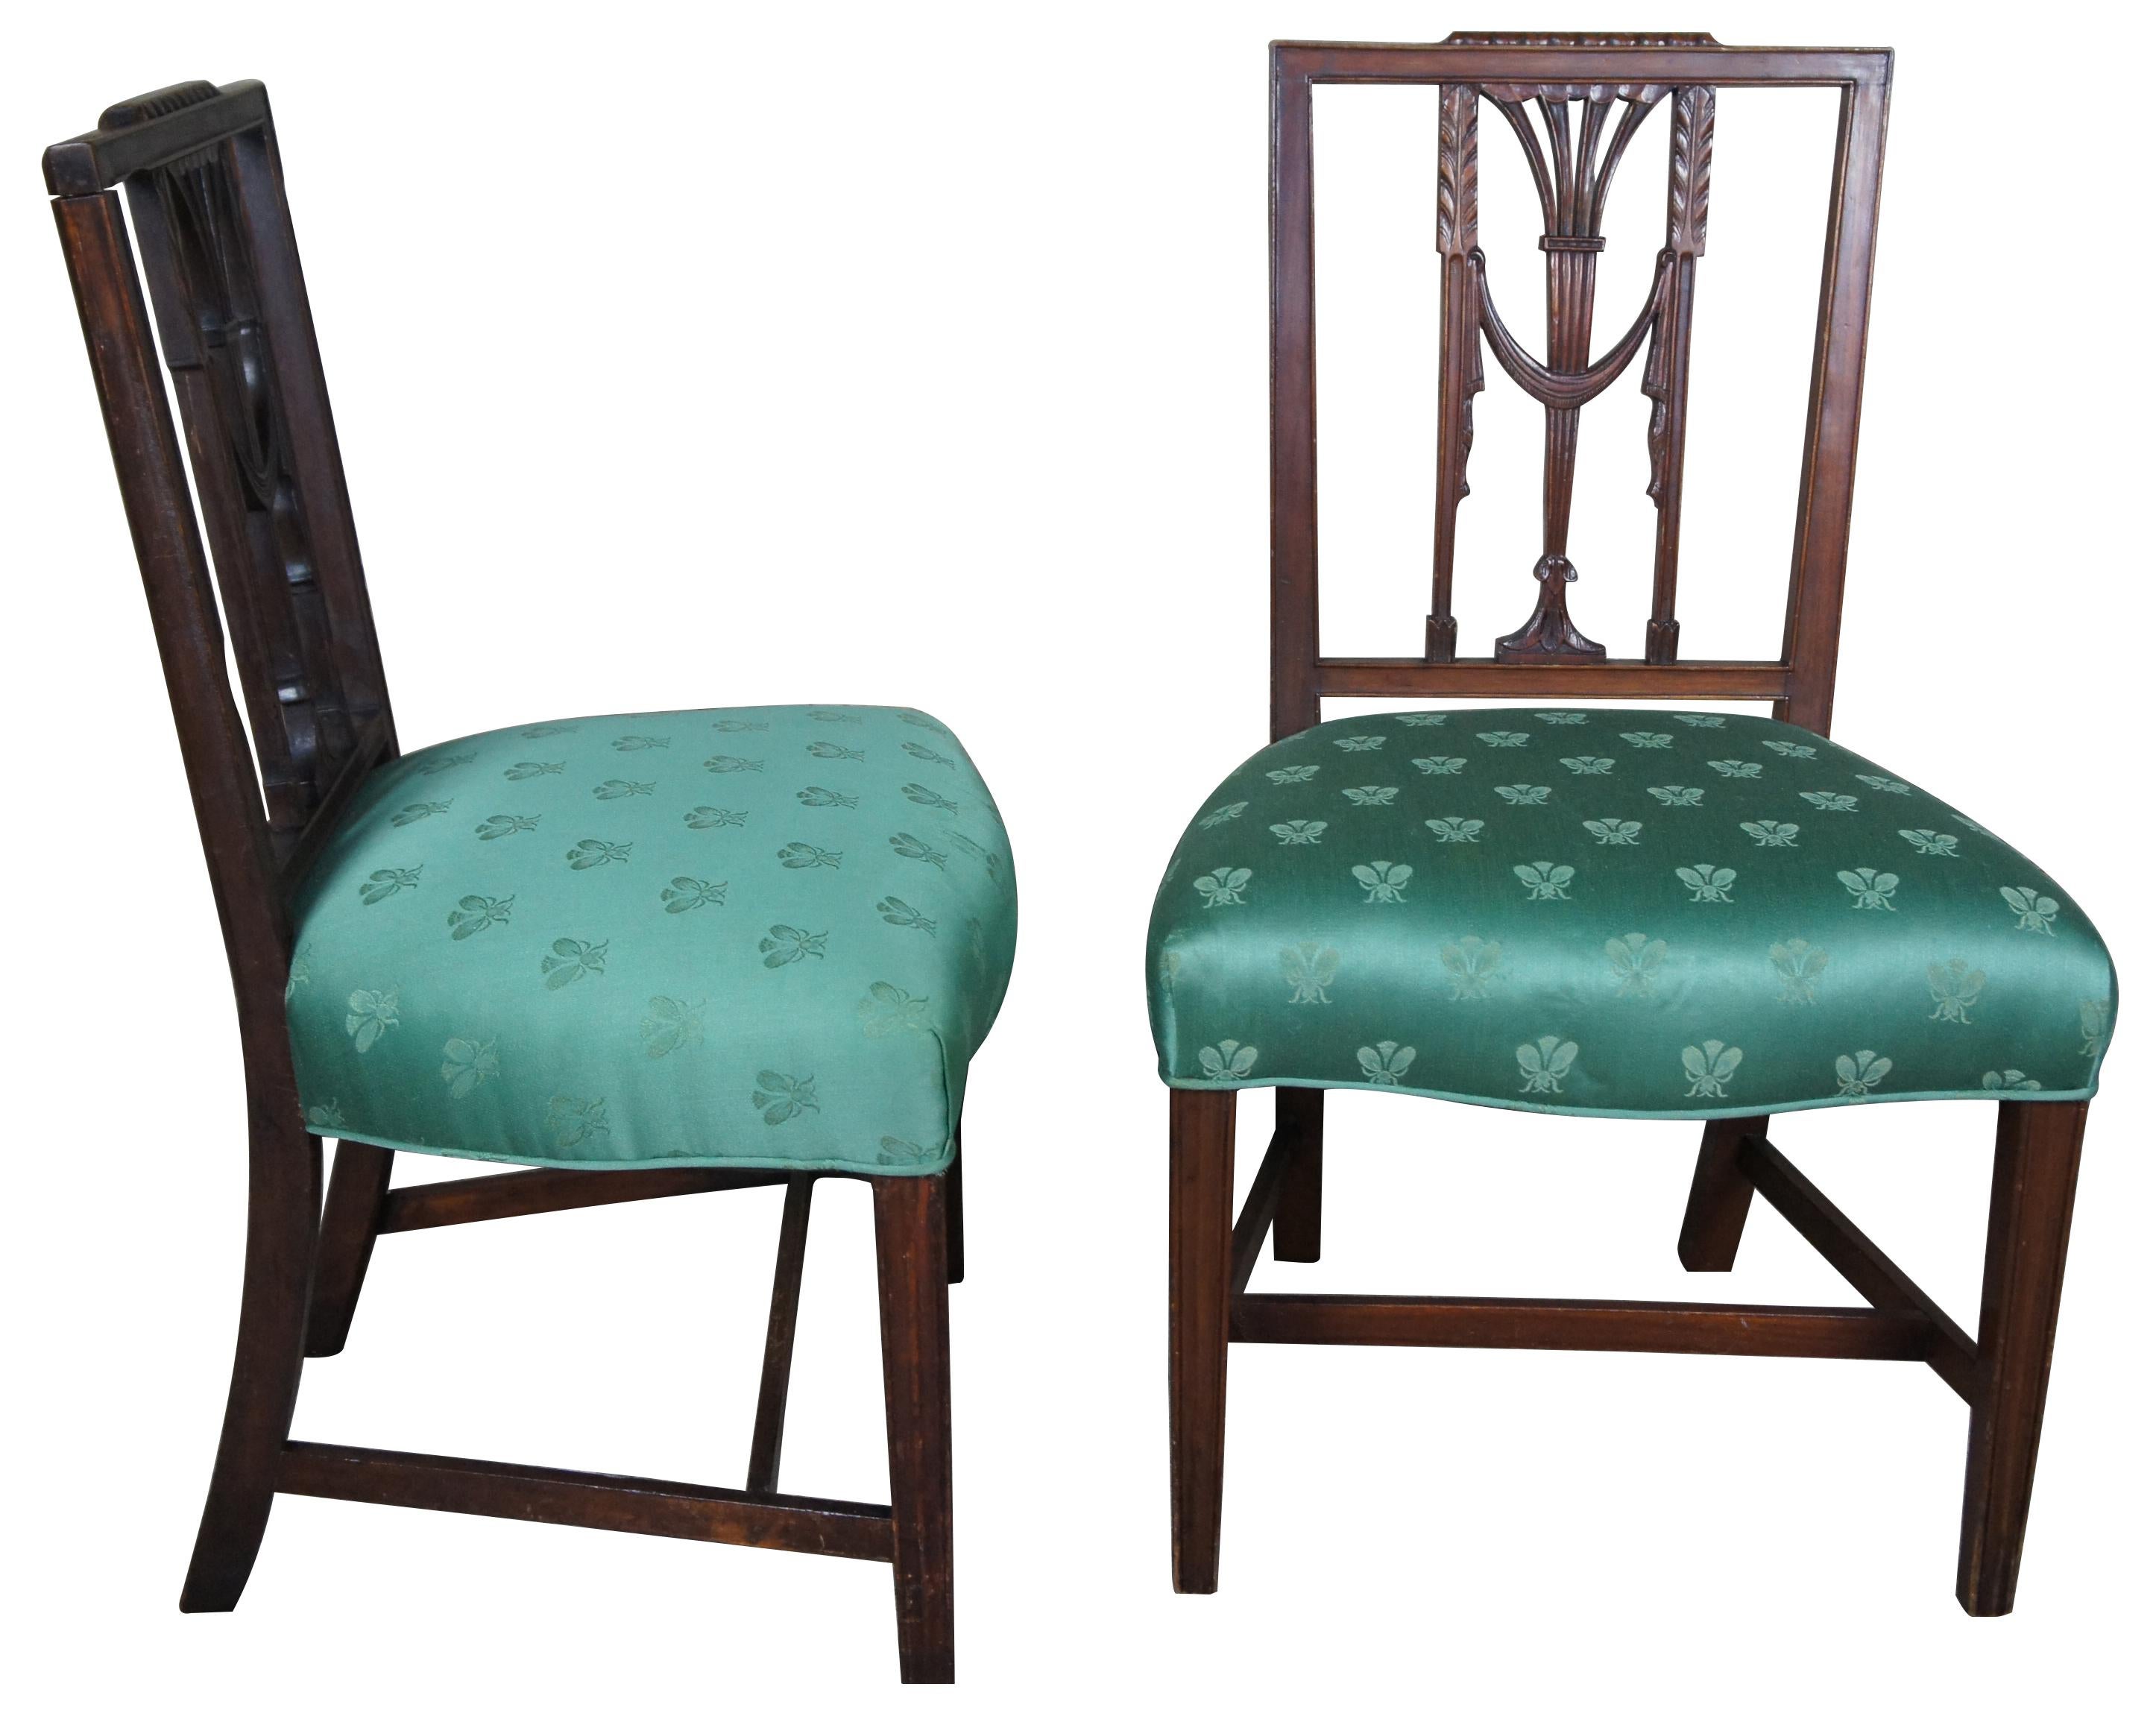 2 Baker Furniture hepplewhite square back chairs Sheraton parlor dining side.

2 matching chairs, one antique and one vintage, Baker Furniture Hepplewhite Square back dining or side chair. Features mahogany wood with green silk fabric seat.